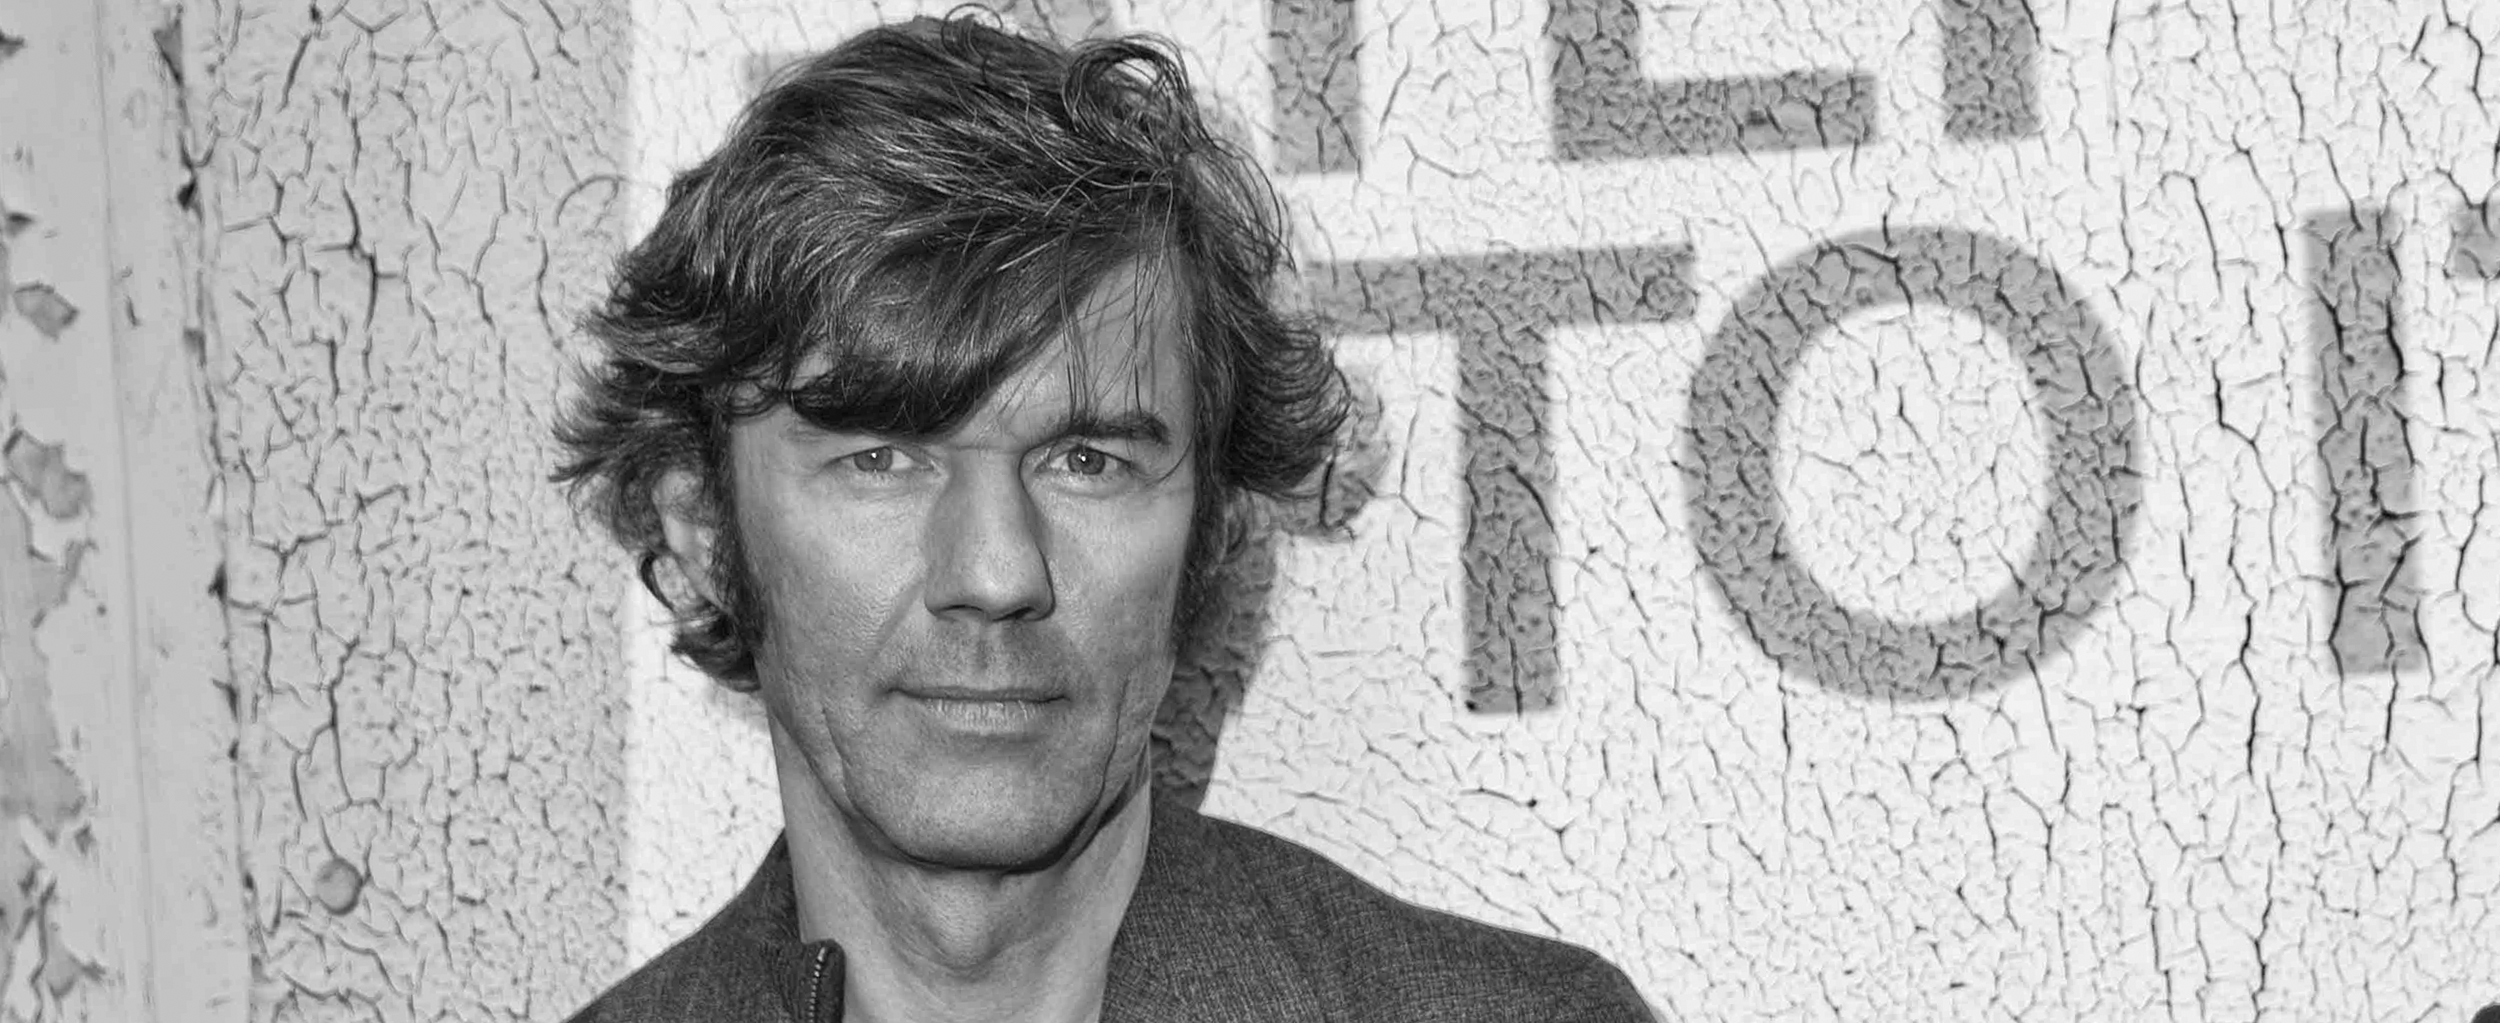 A Moment With Stefan Sagmeister